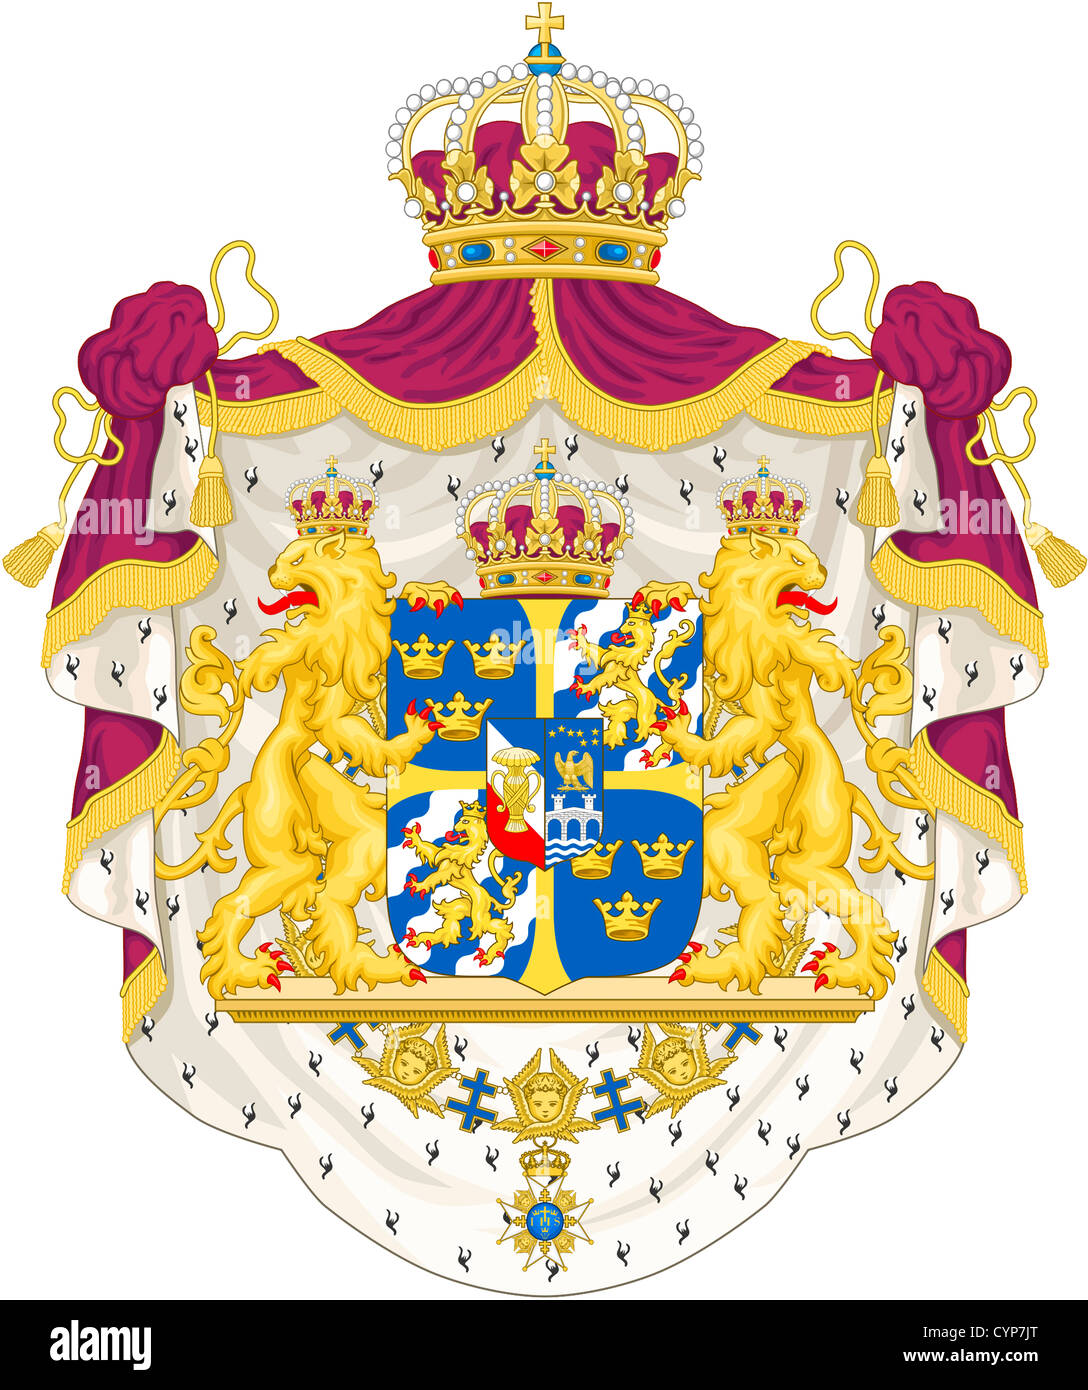 National coat of arms of Sweden. Stock Photo